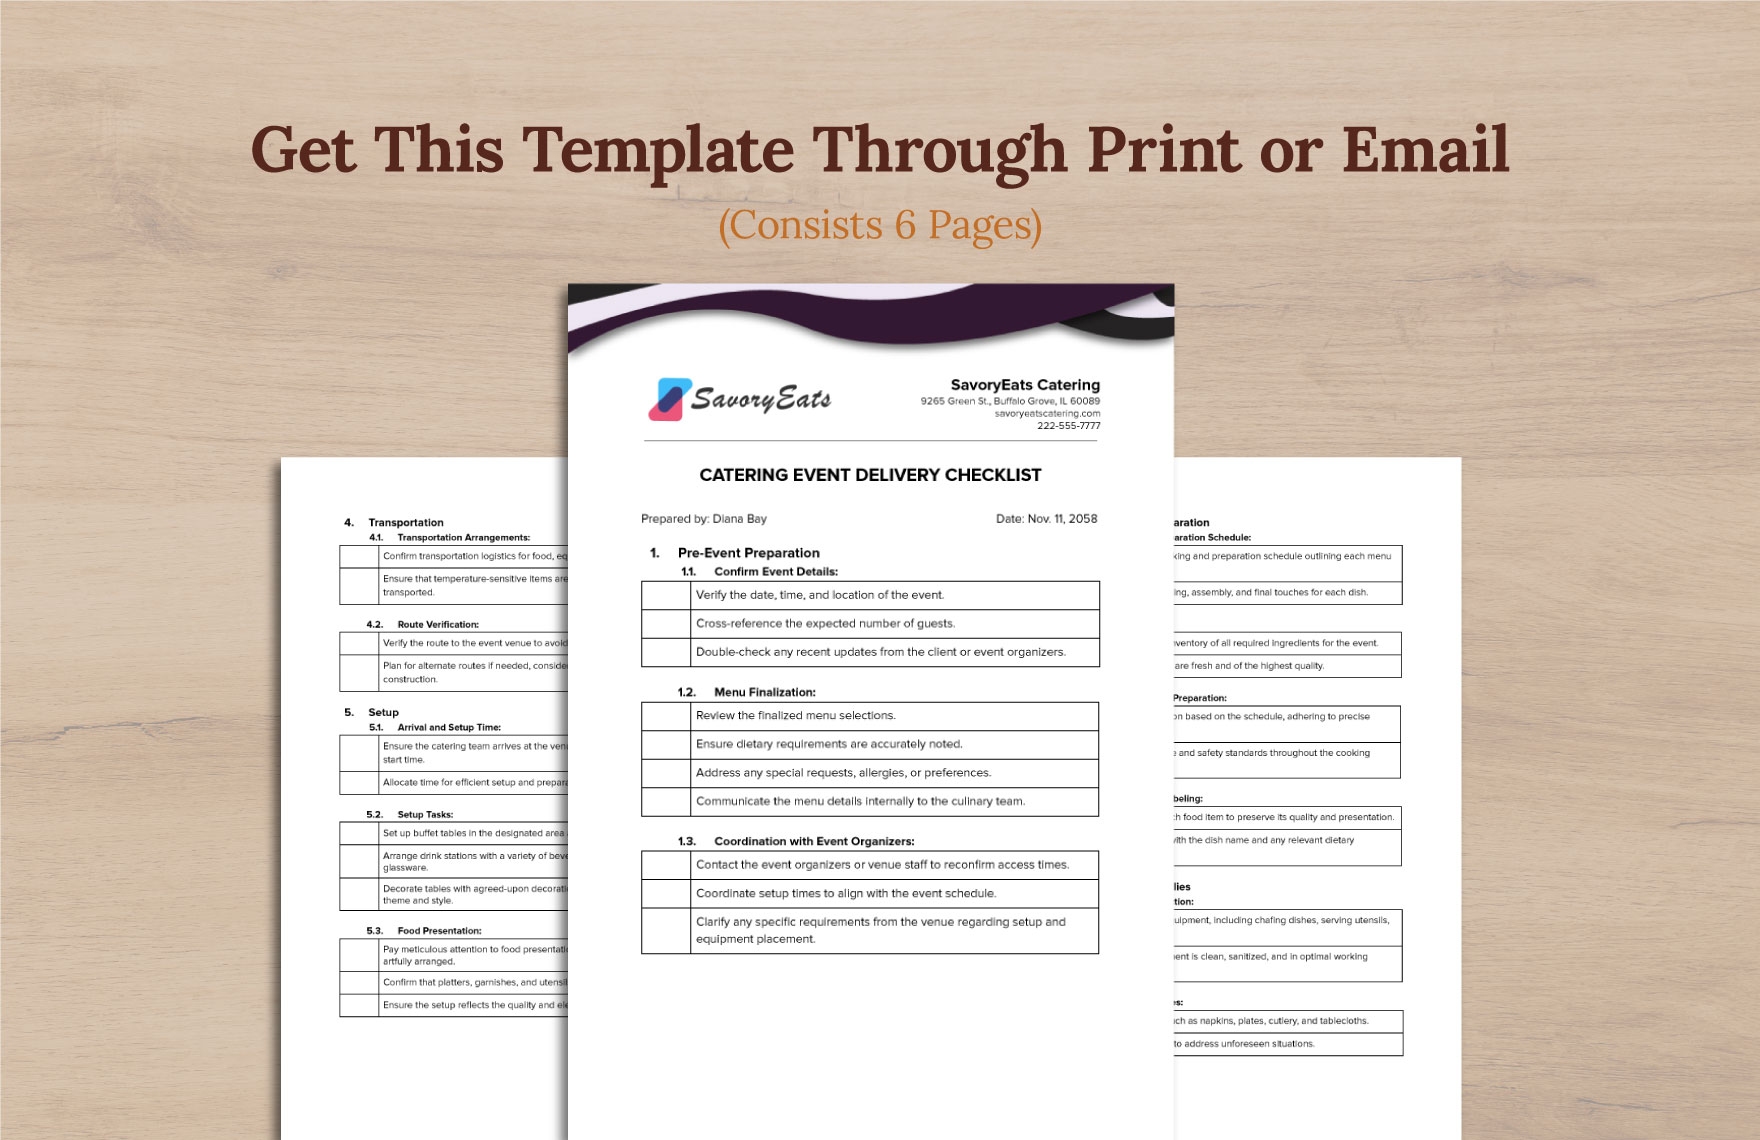 Catering Event Delivery Checklist Template